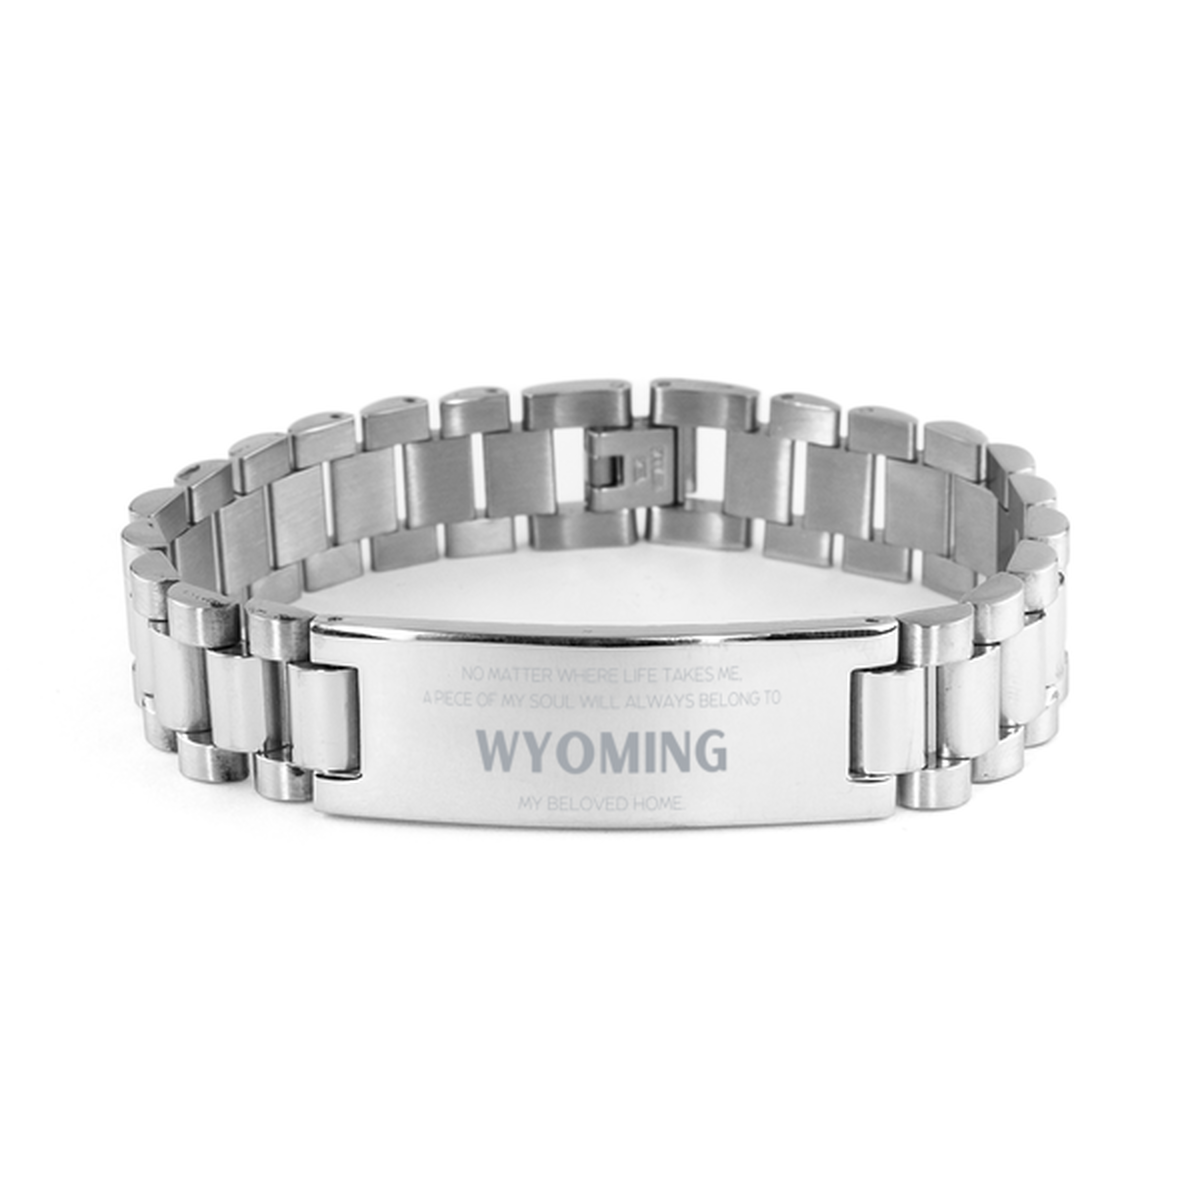 Love Wyoming State Gifts, My soul will always belong to Wyoming, Proud Ladder Stainless Steel Bracelet, Birthday Unique Gifts For Wyoming Men, Women, Friends